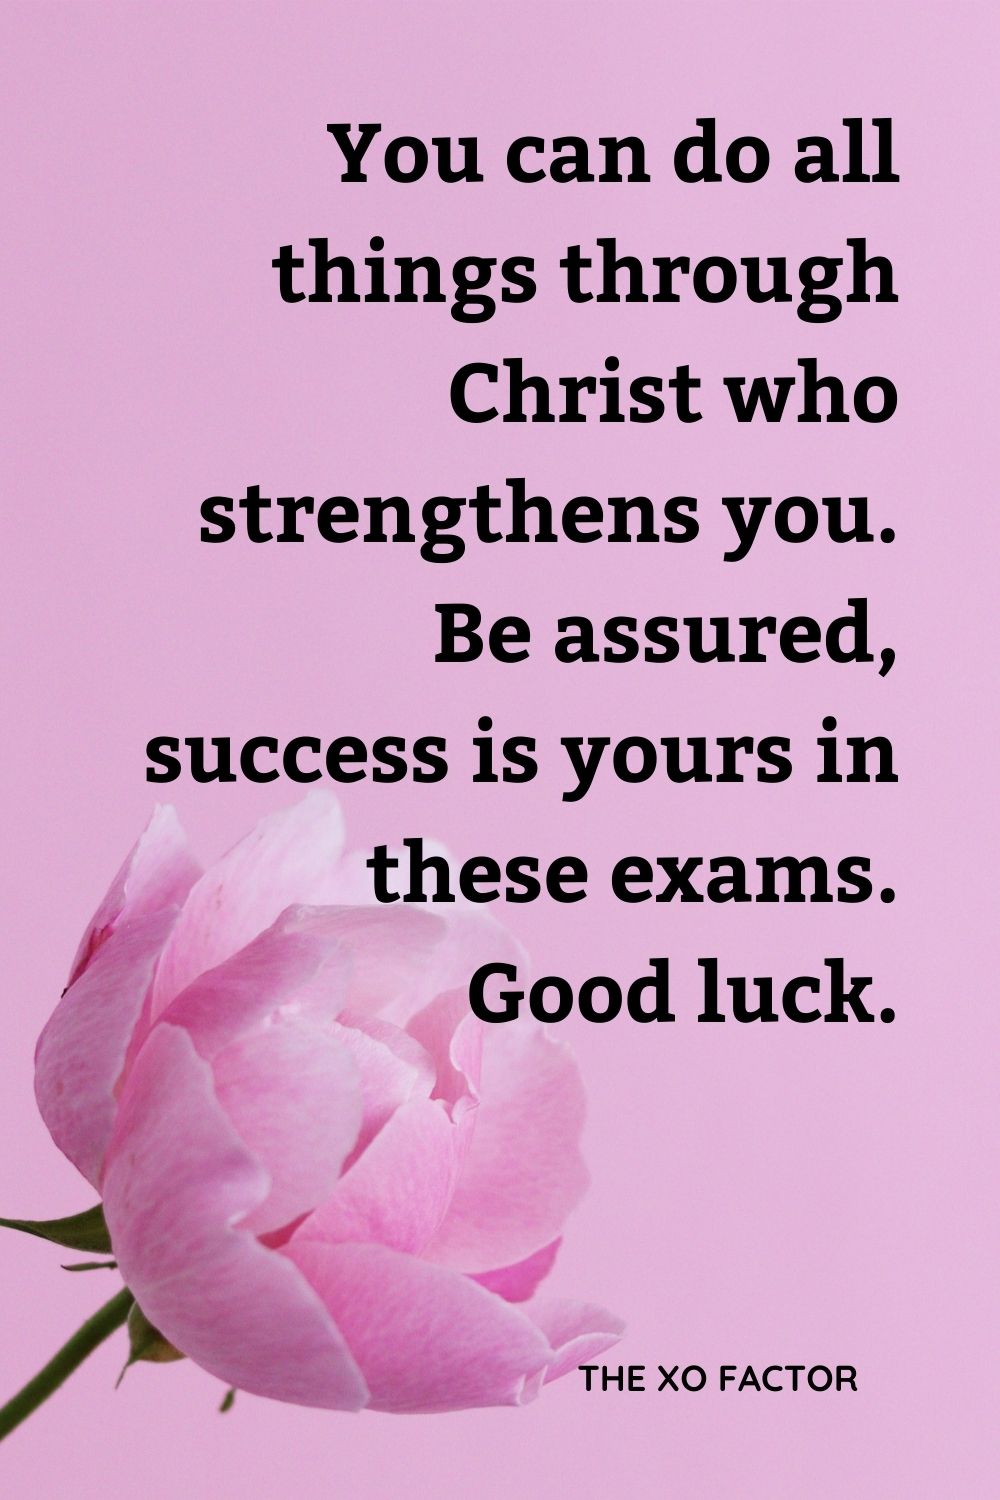 You can do all things through Christ who strengthens you. Be assured, success is yours in these exams. Good luck.